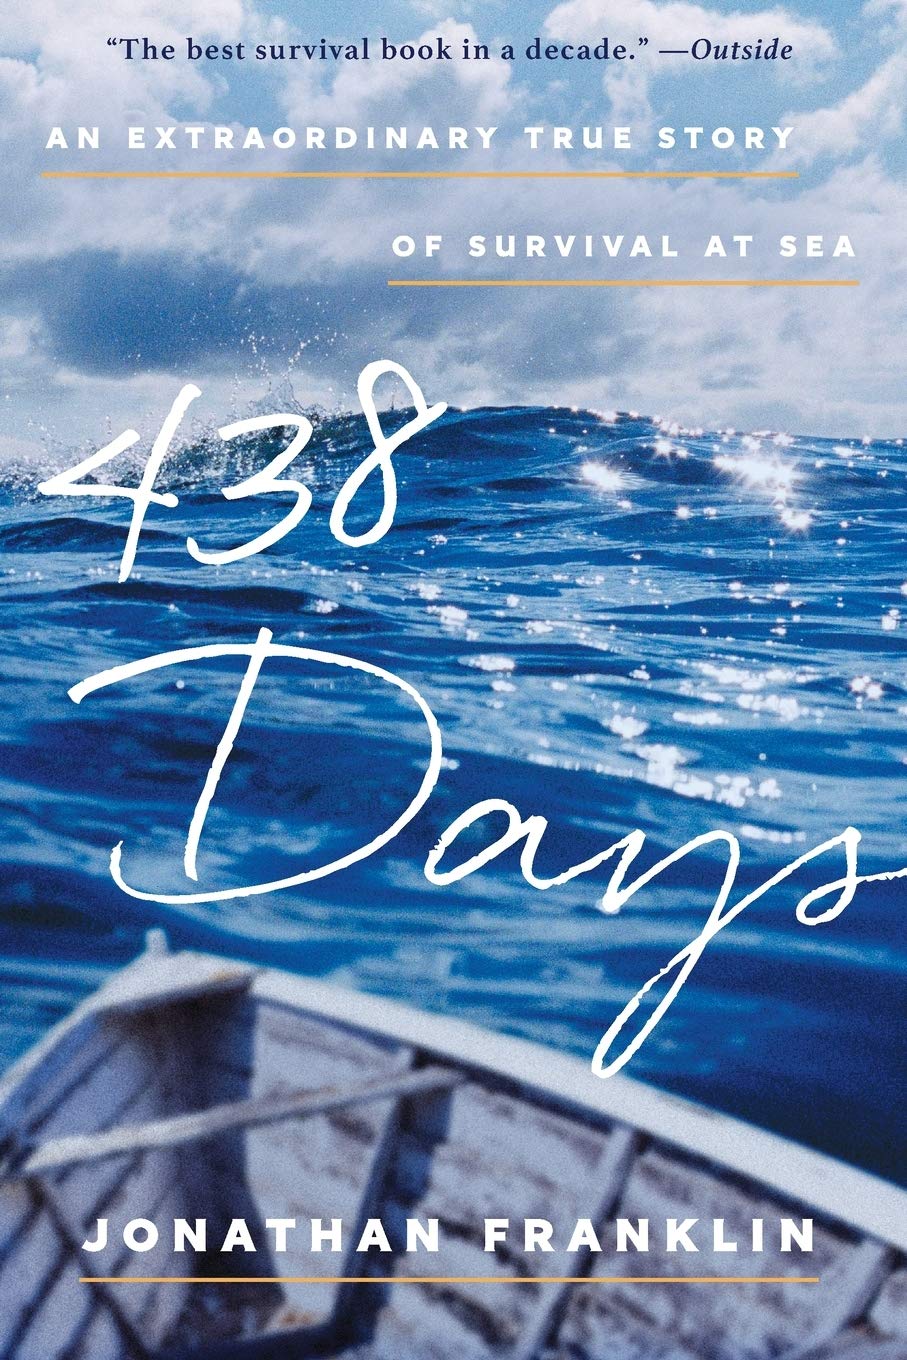 Image for "438 Days"